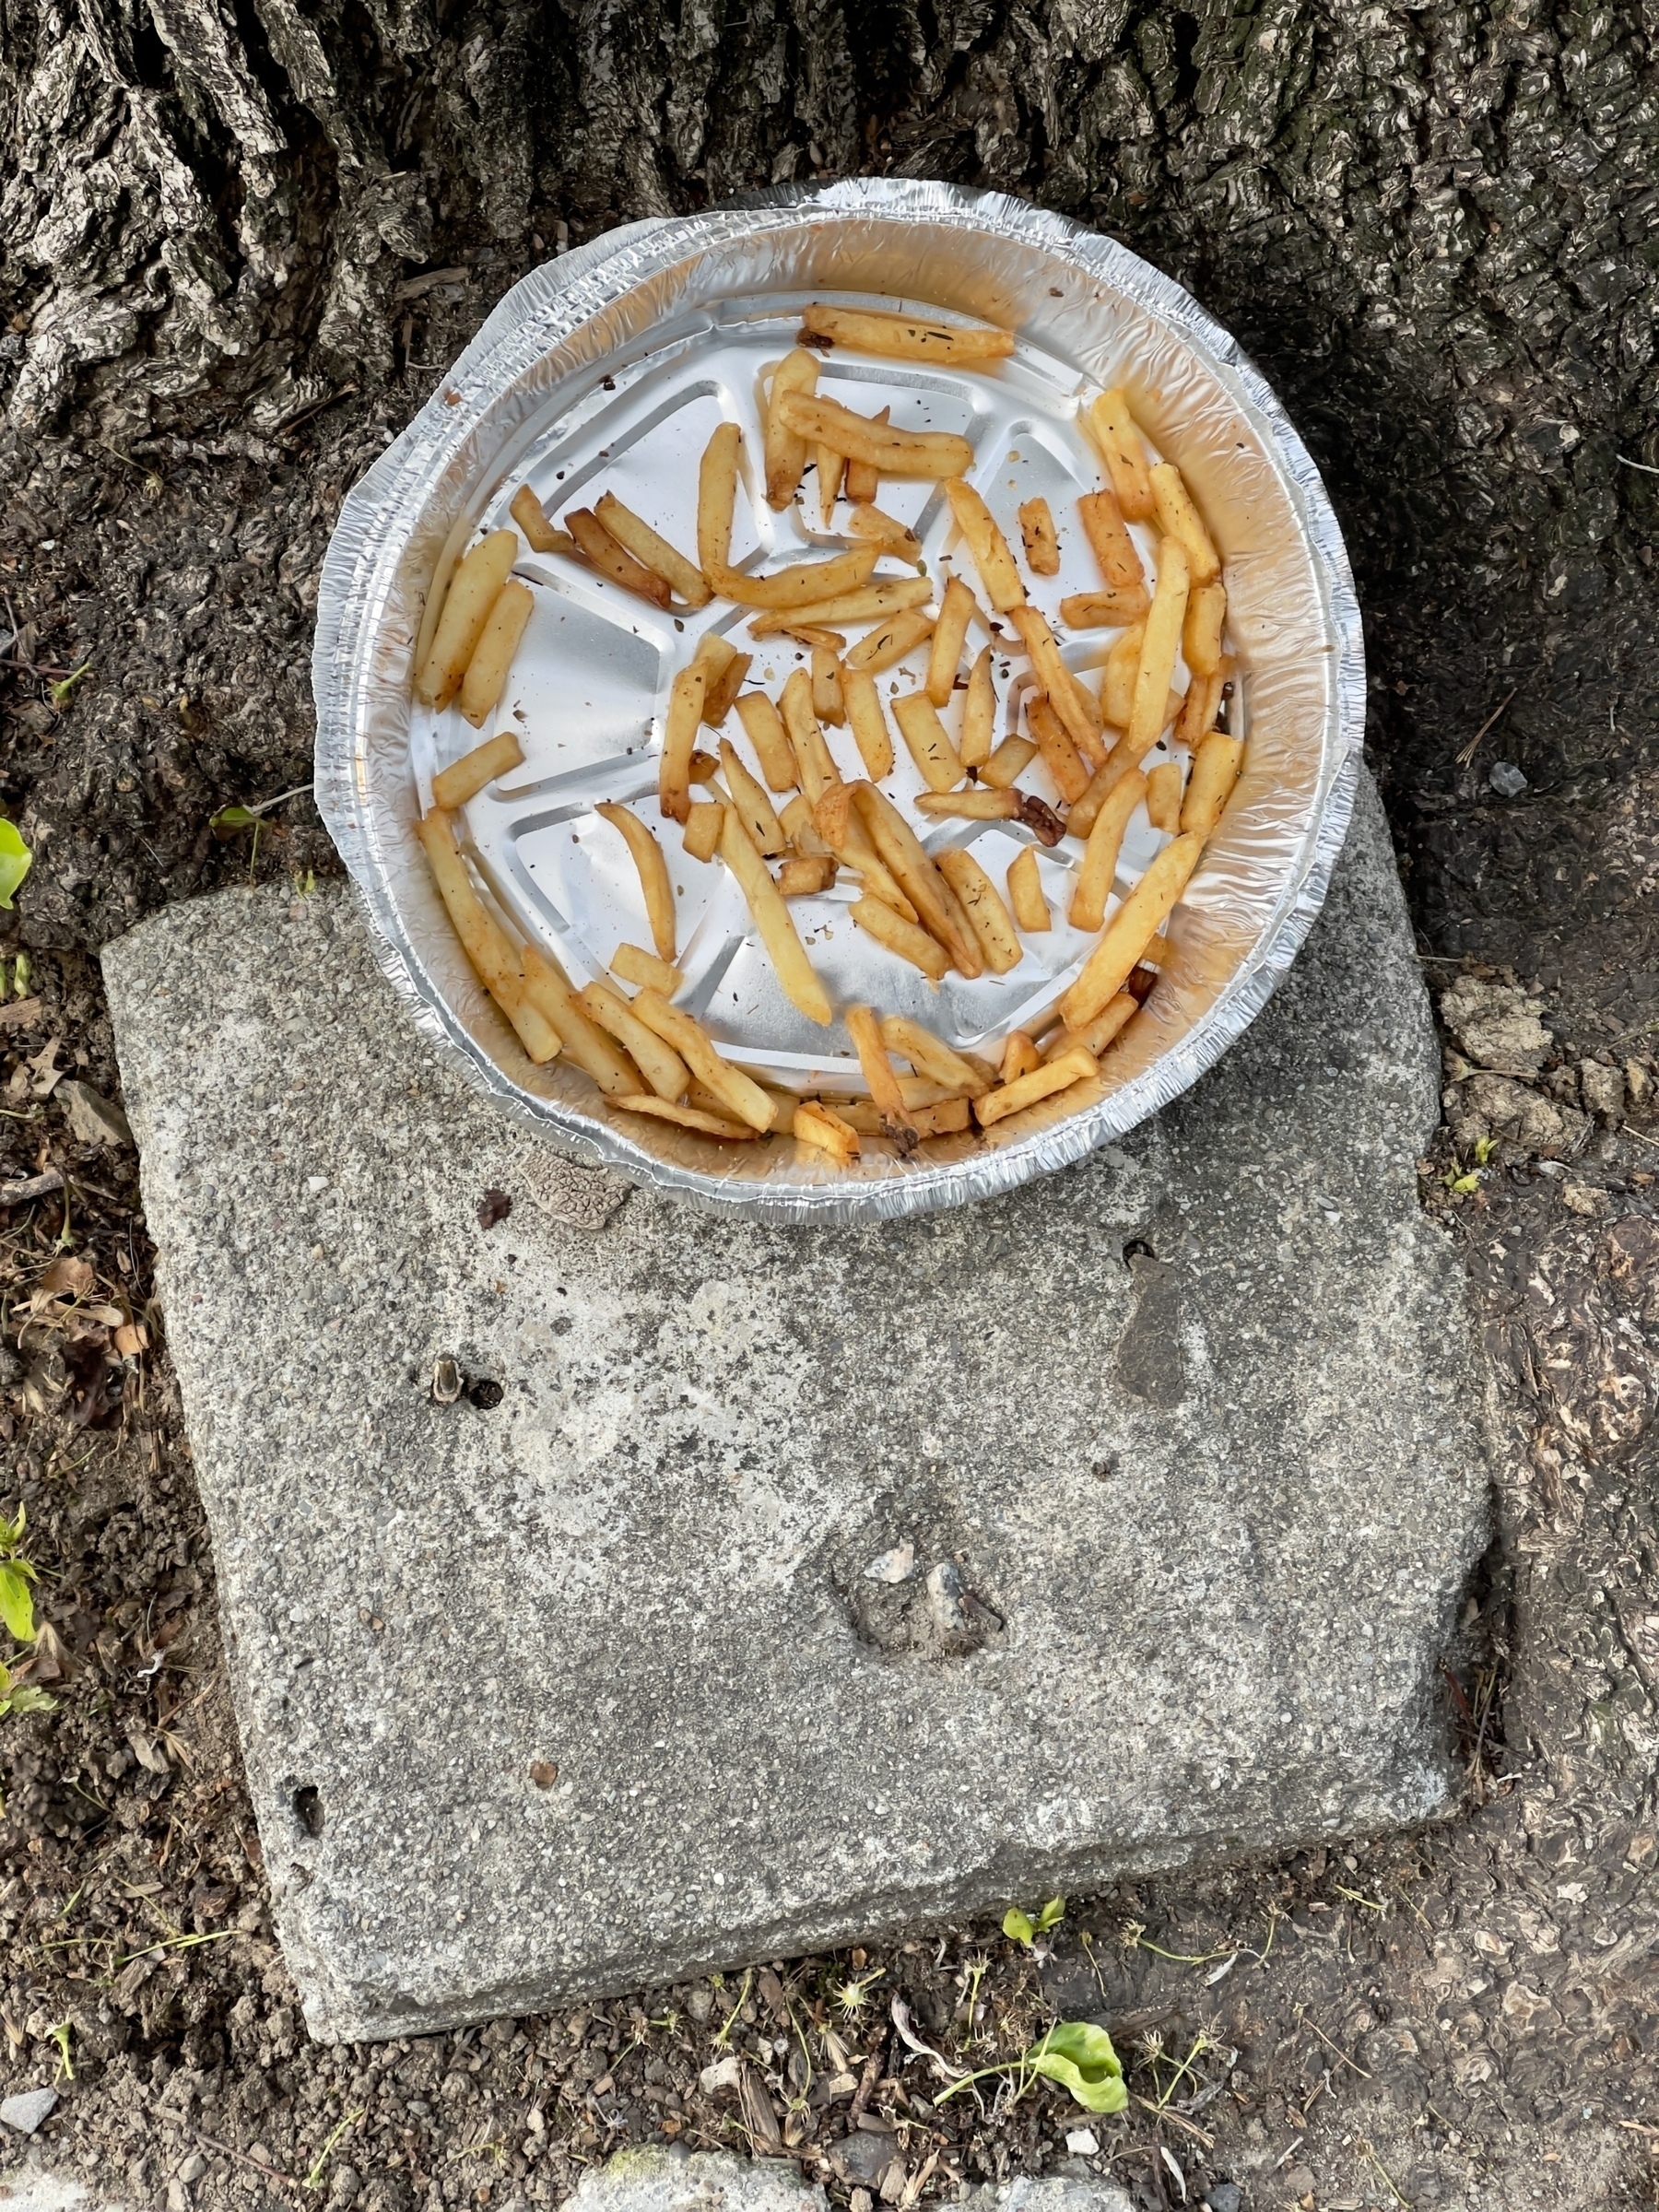 Aluminum take out dish with french fries on the ground.